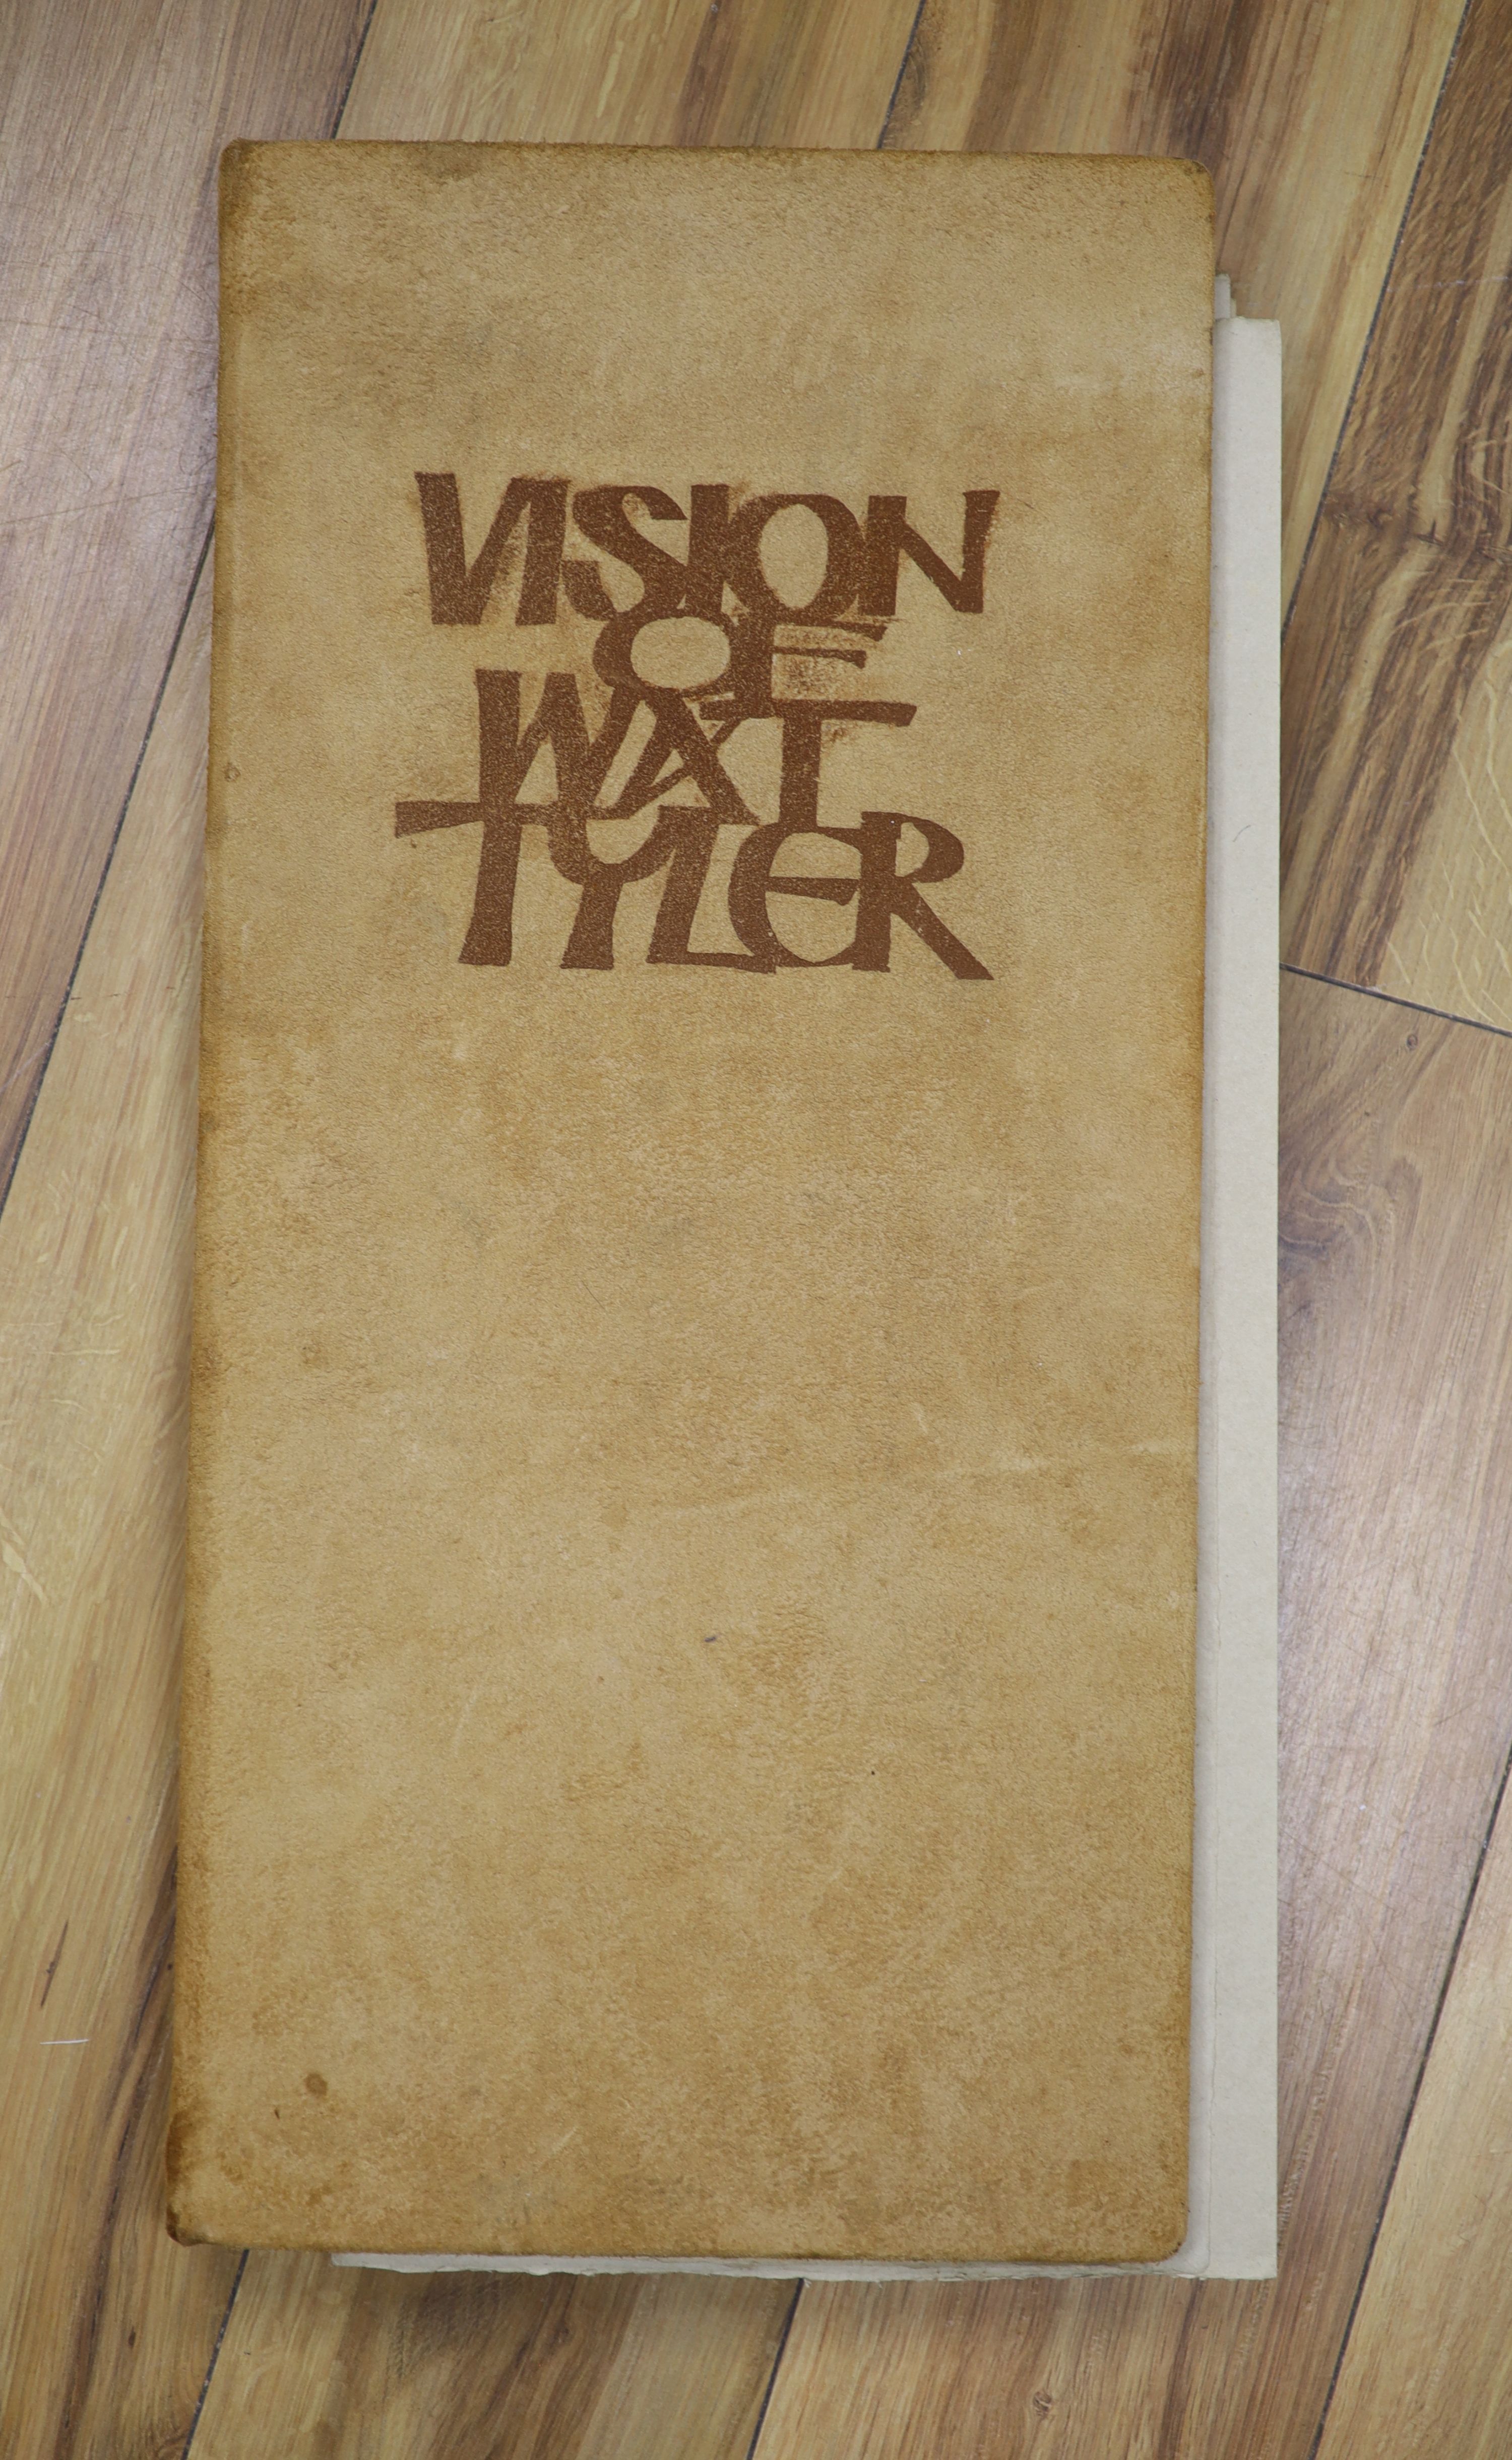 Graham Clarke, limited edition folio, 'Vision of Wat Tyler', 23/75, overall 61 x 30cm